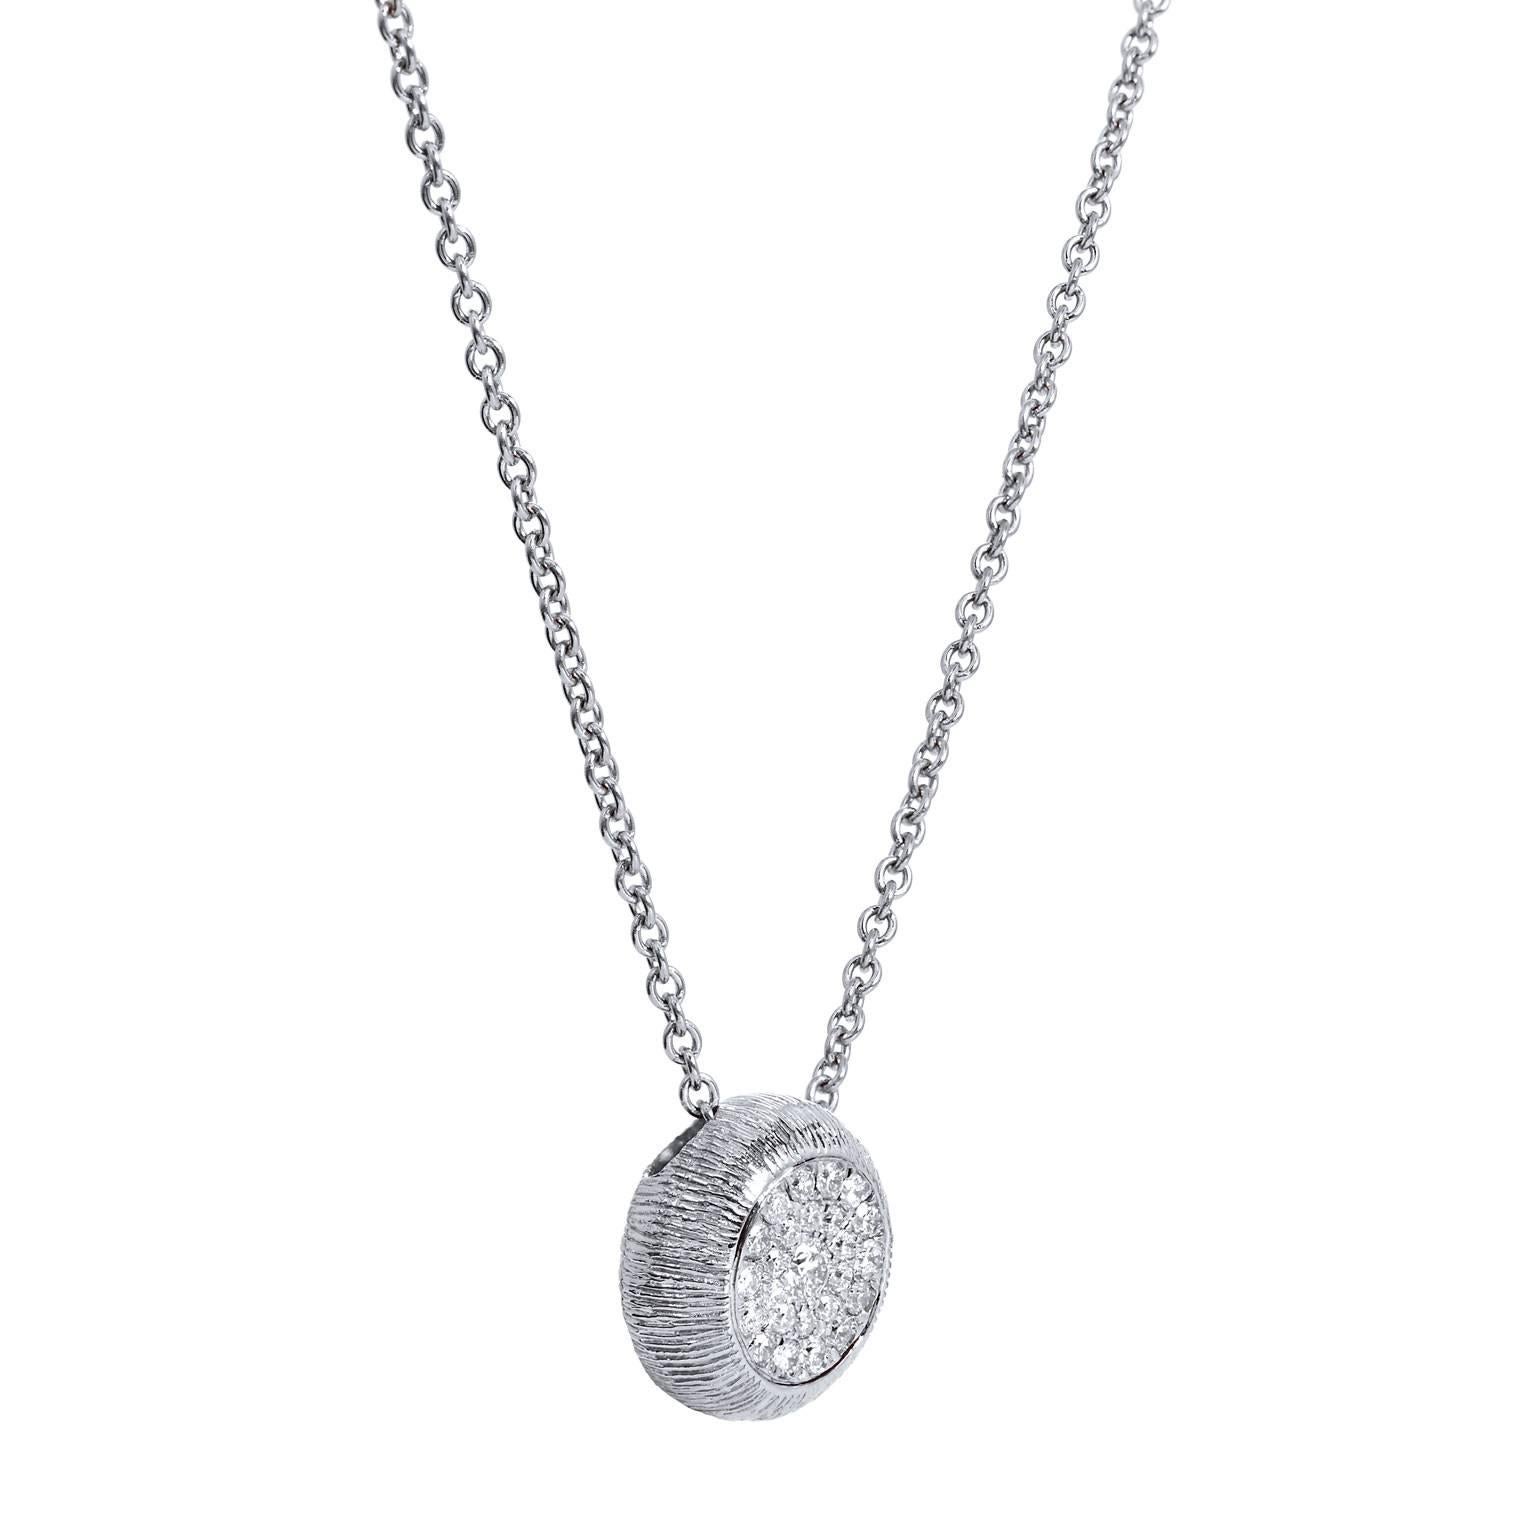 Twenty-five pave-set diamonds, with a total weight of 0.25 carat (G/H/VS), are bezel set in 18 karat white gold and features a textured appearance in this drop pendant necklace.

The pendant measures 11 mm in diameter.  
The necklace measures 18